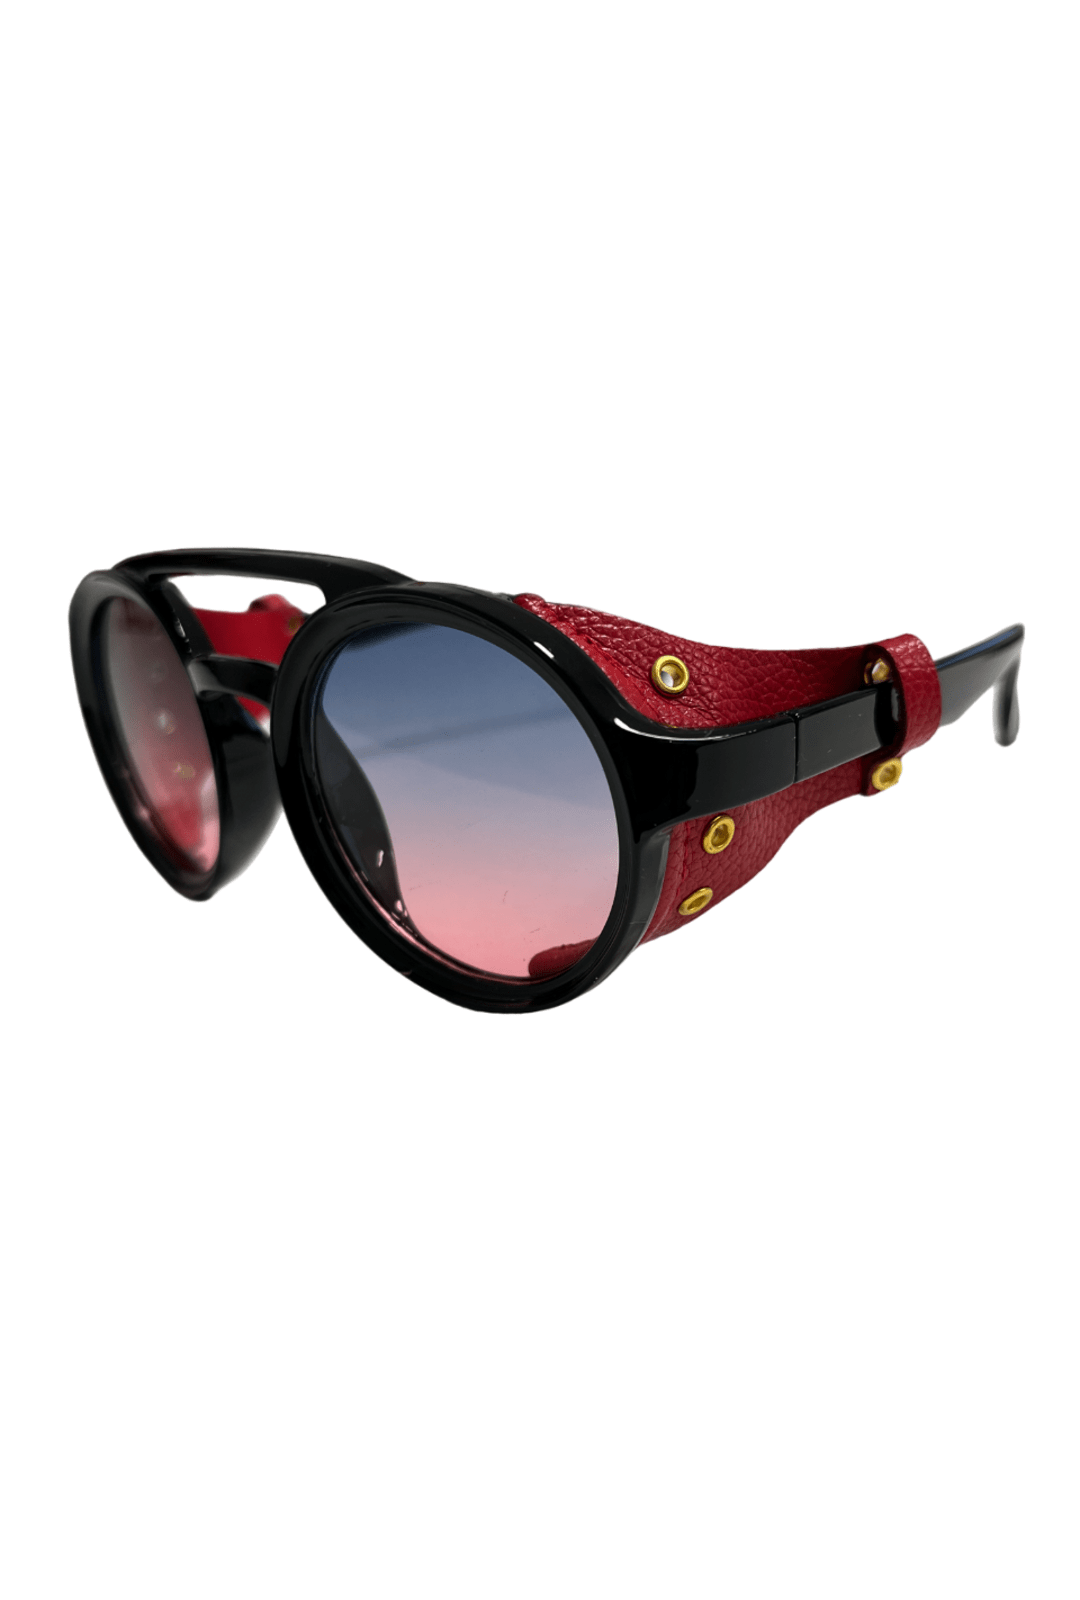 Red & Black Steampunk Glasses with Faux Leather Rivet Details